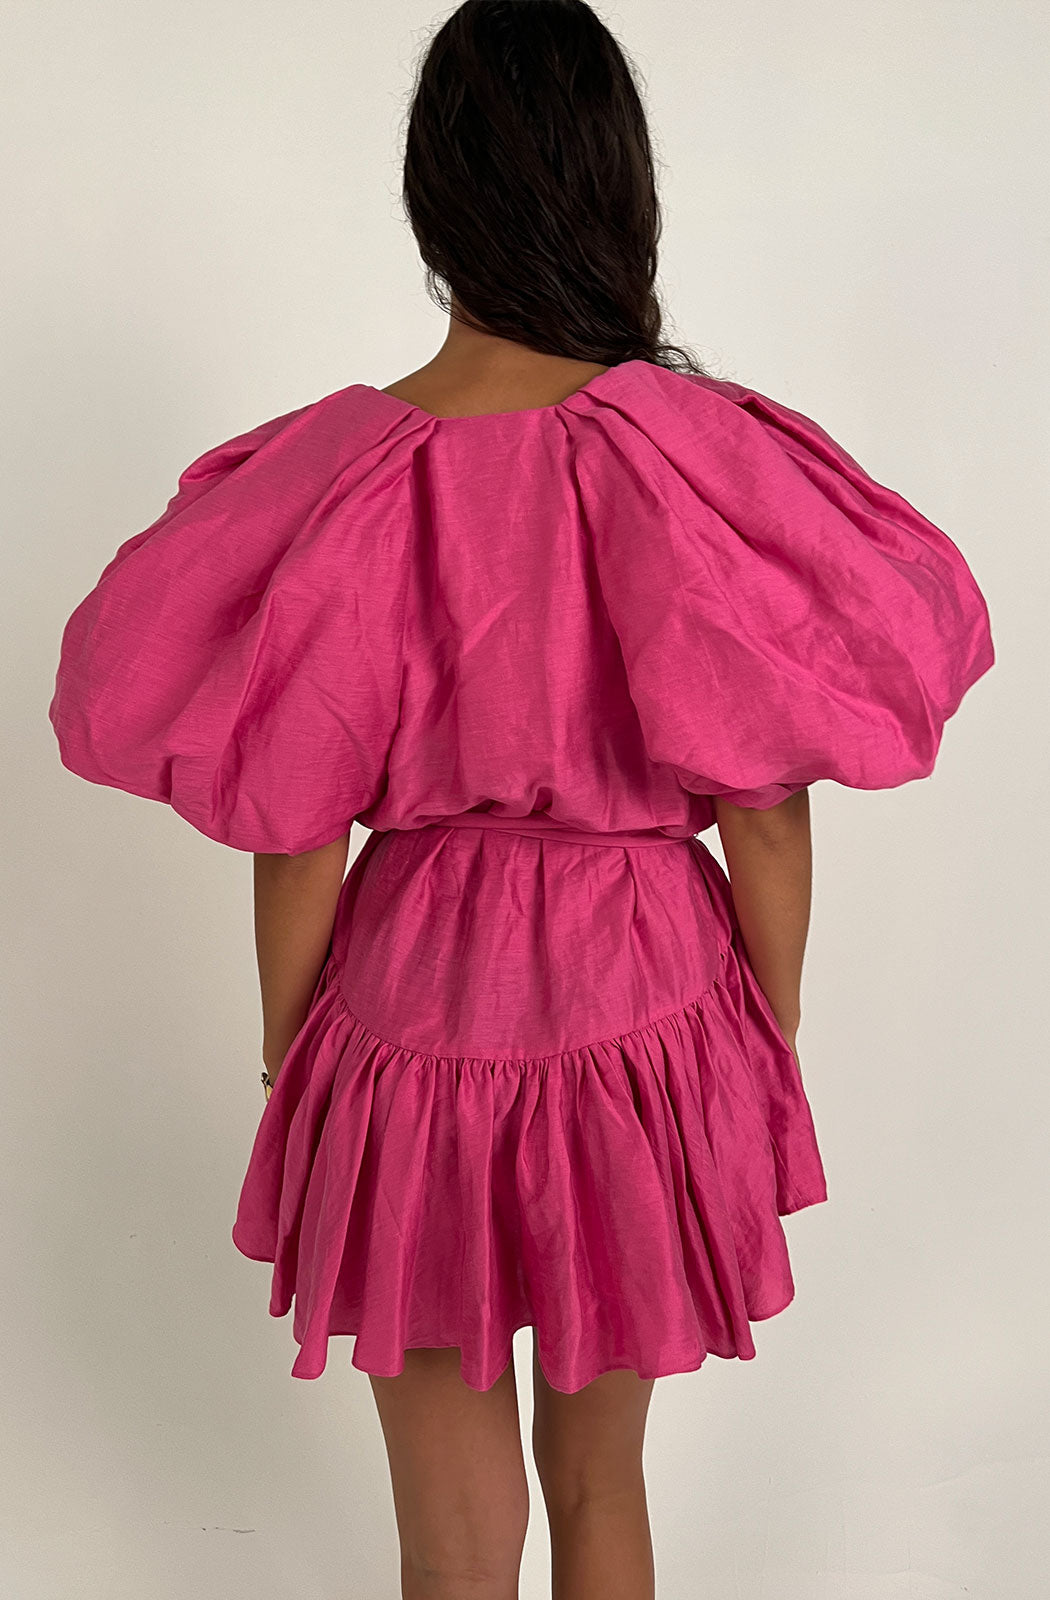 the Wheatland Dress in Flamingo is an elevated look. Crafted from a lush linen blend fabrication, this silhouette features accentuated sleeves, v-neckline, frill toward the hem and elevated d-ring belt with luxe gold hardware.